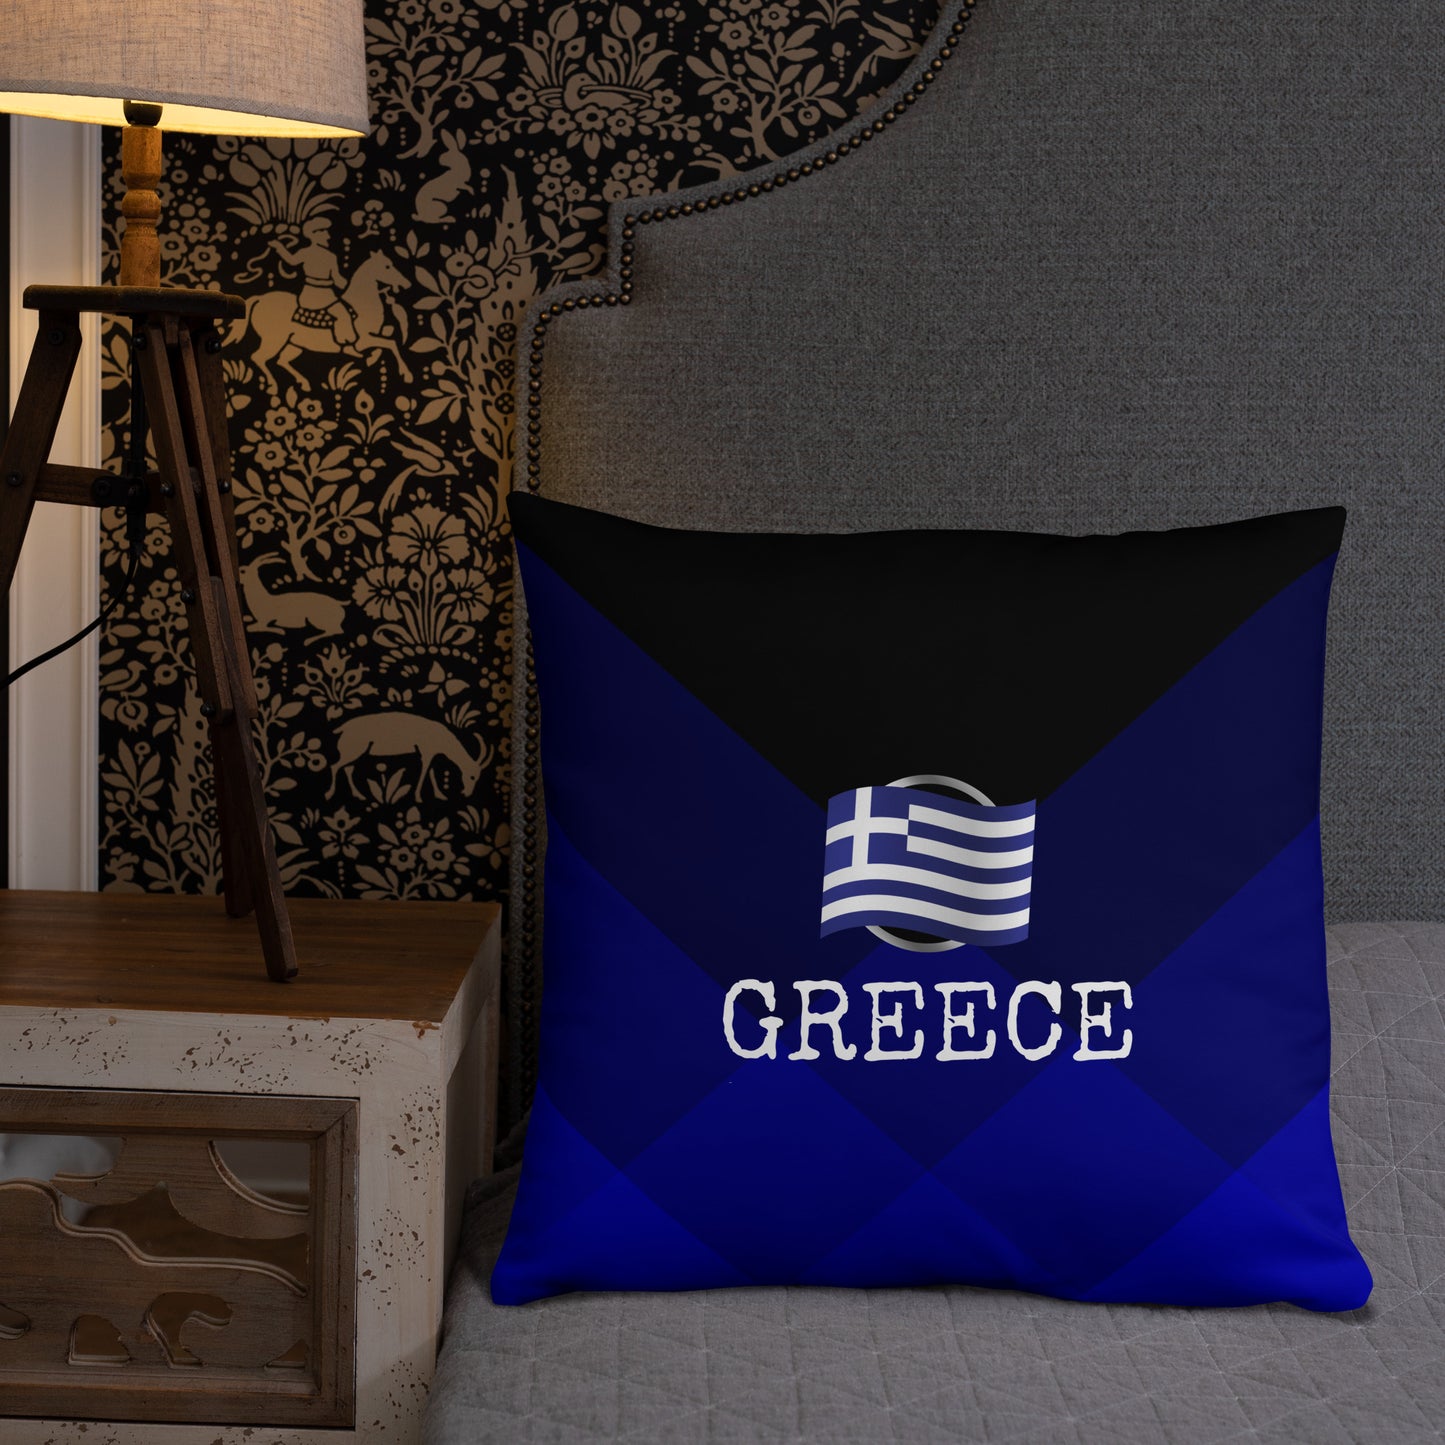 Greece Travel Gift | Greece Vacation Gift | Greece Travel Souvenir | Greece Vacation Memento | Greece Home Décor | Keepsake Souvenir Gift | Travel Vacation Gift | World Travel Gift Pillow